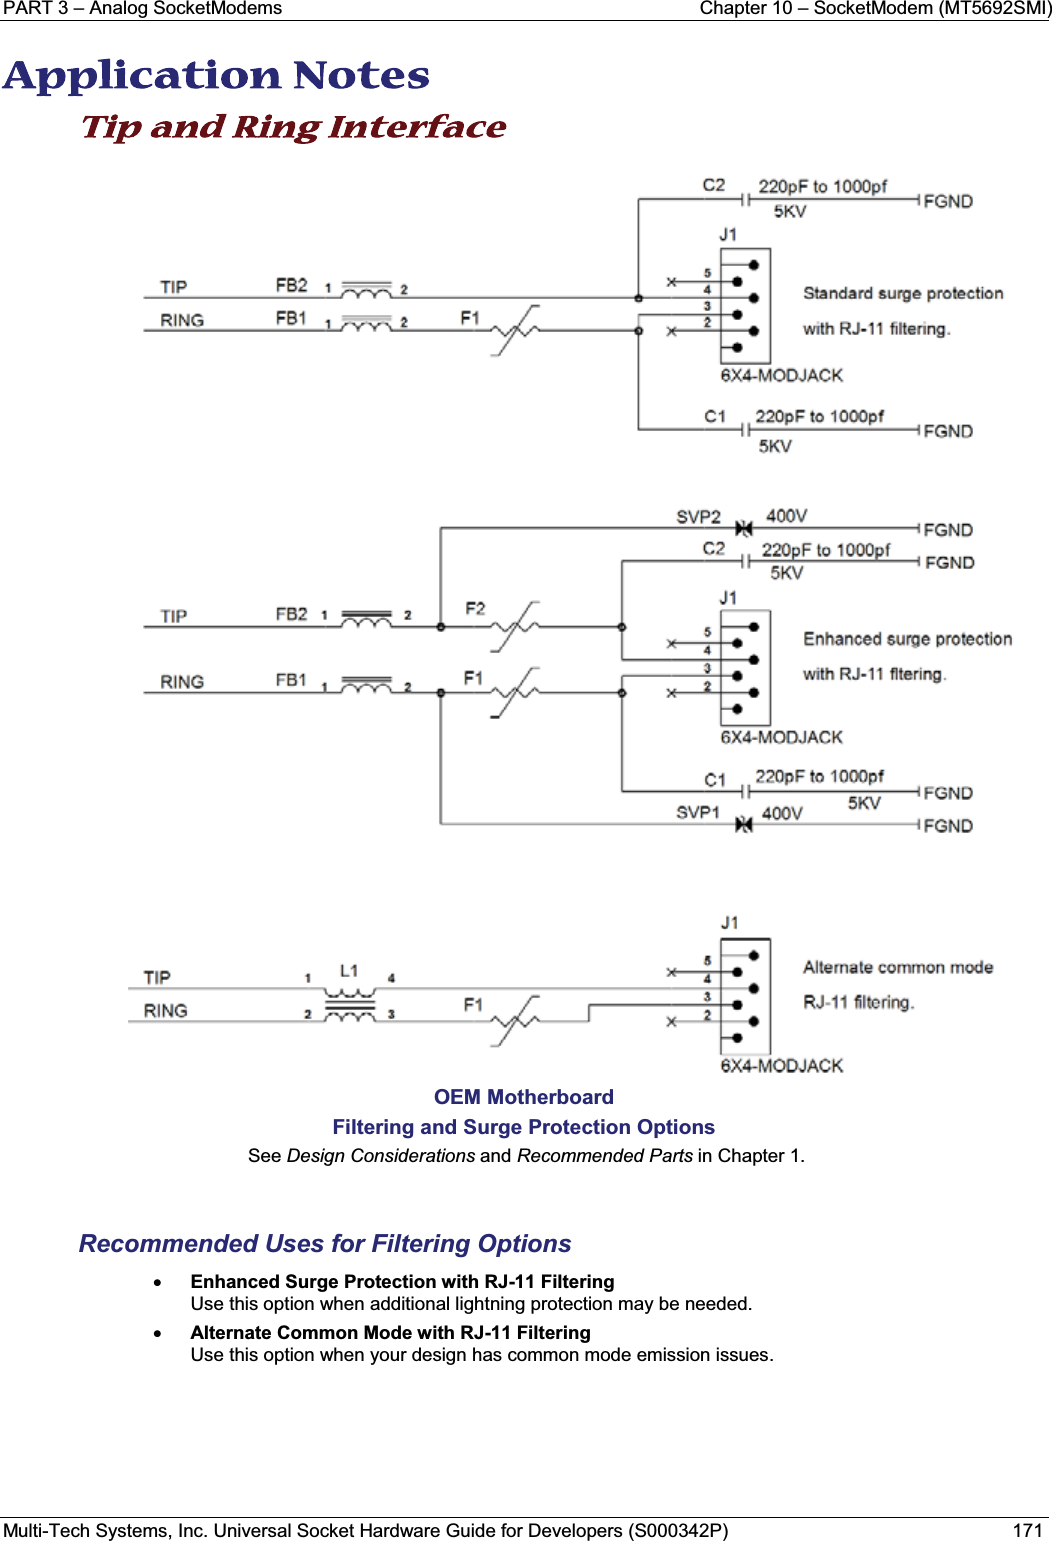 PART 3 – Analog SocketModems Chapter 10 – SocketModem (MT5692SMI)Multi-Tech Systems, Inc. Universal Socket Hardware Guide for Developers (S000342P) 171AApplication Notes Tip and Ring Interface OEM MotherboardFiltering and Surge Protection Options           See Design Considerations and Recommended Parts in Chapter 1.Recommended Uses for Filtering OptionsxEnhanced Surge Protection with RJ-11 FilteringUse this option when additional lightning protection may be needed.xAlternate Common Mode with RJ-11 FilteringUse this option when your design has common mode emission issues.